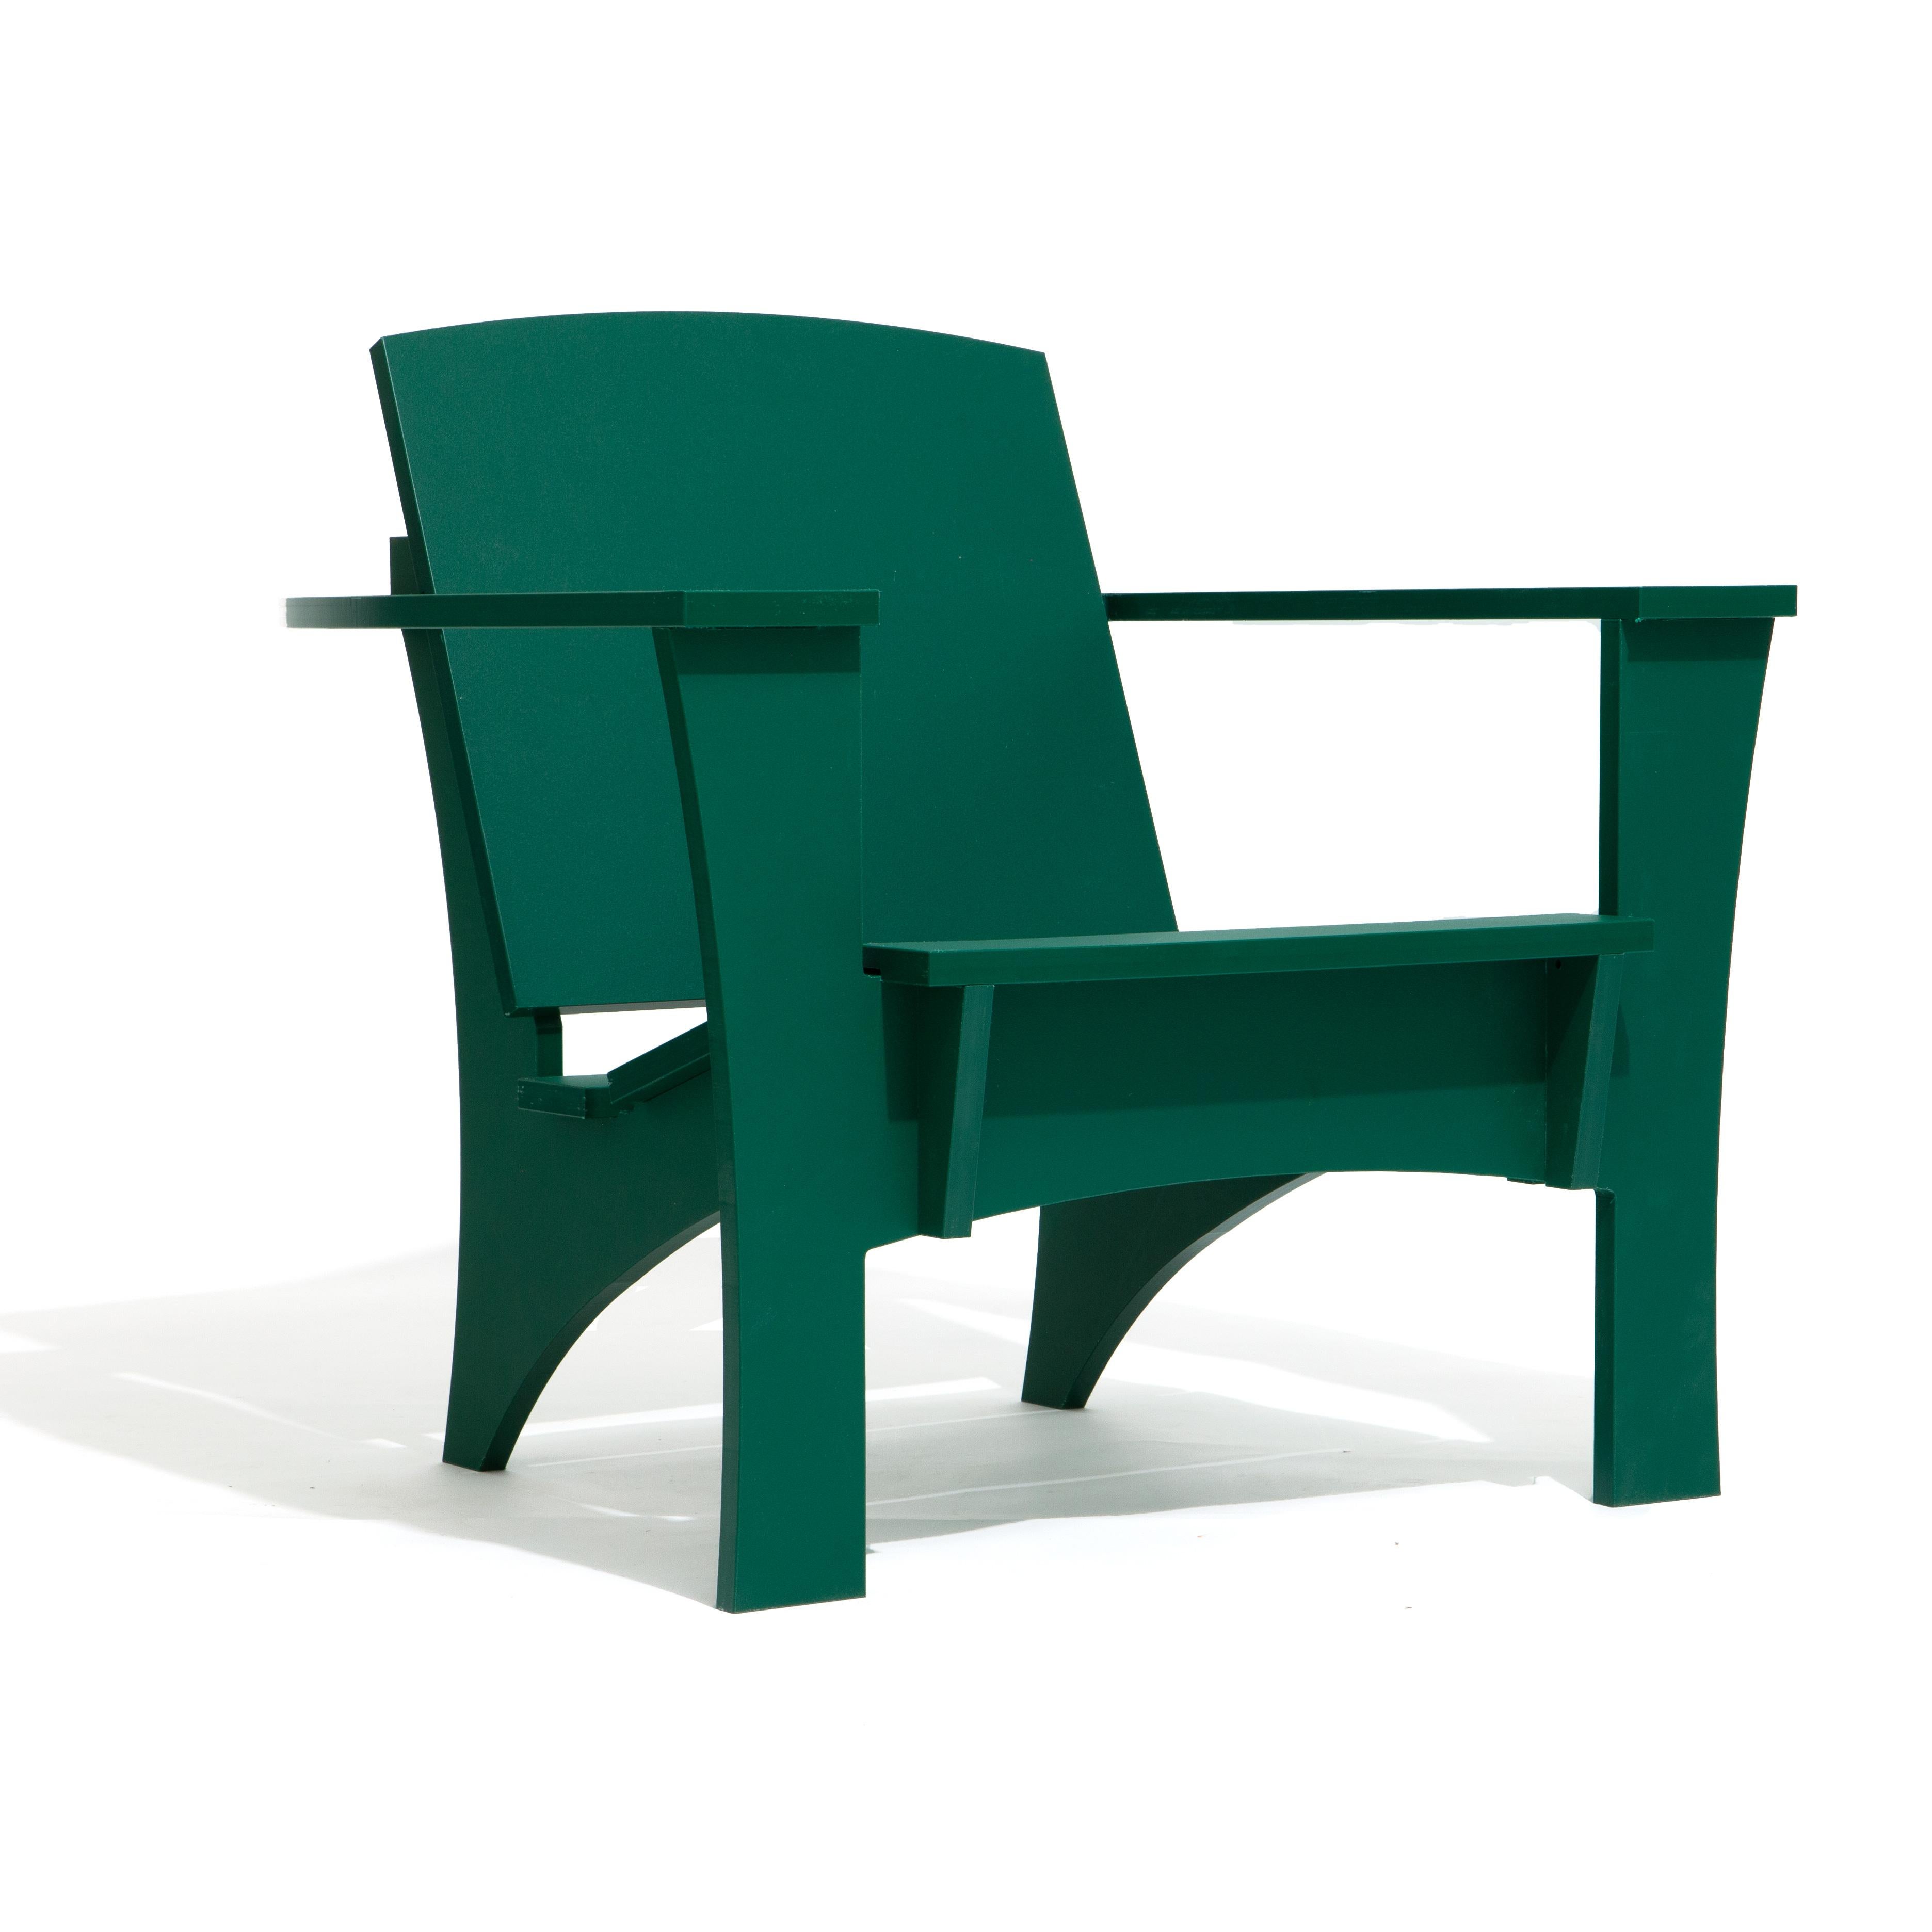 Plastic Zero-Waste, Weatherproof, Body-Fit, Upstate New York-Made Lounge Chair For Sale